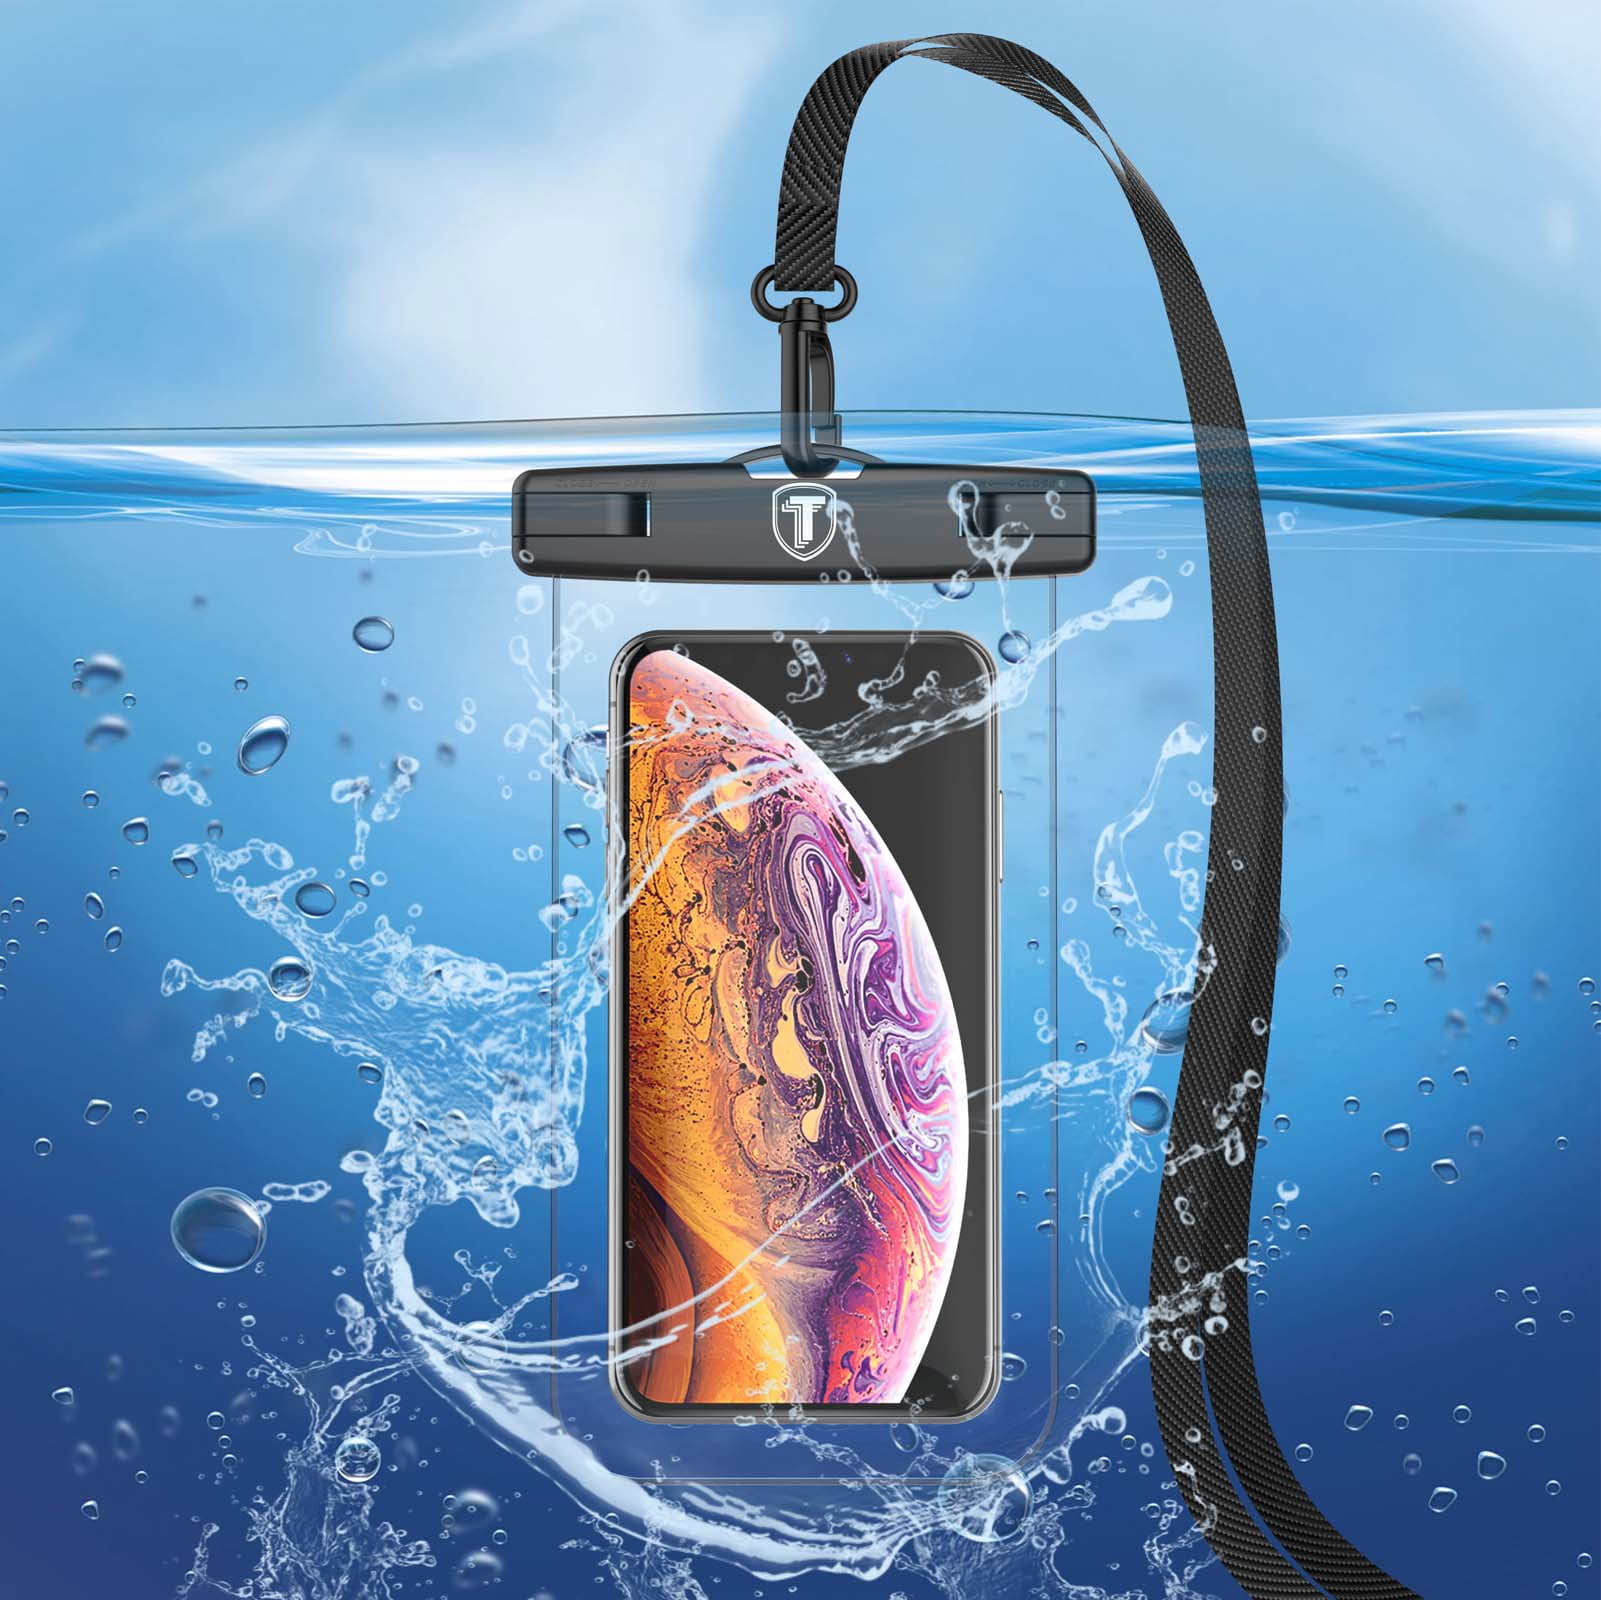 Details about   ODYSSEY Waterproof Roll Top Dry Bag w/Free Water Proof Cell Phone Case 